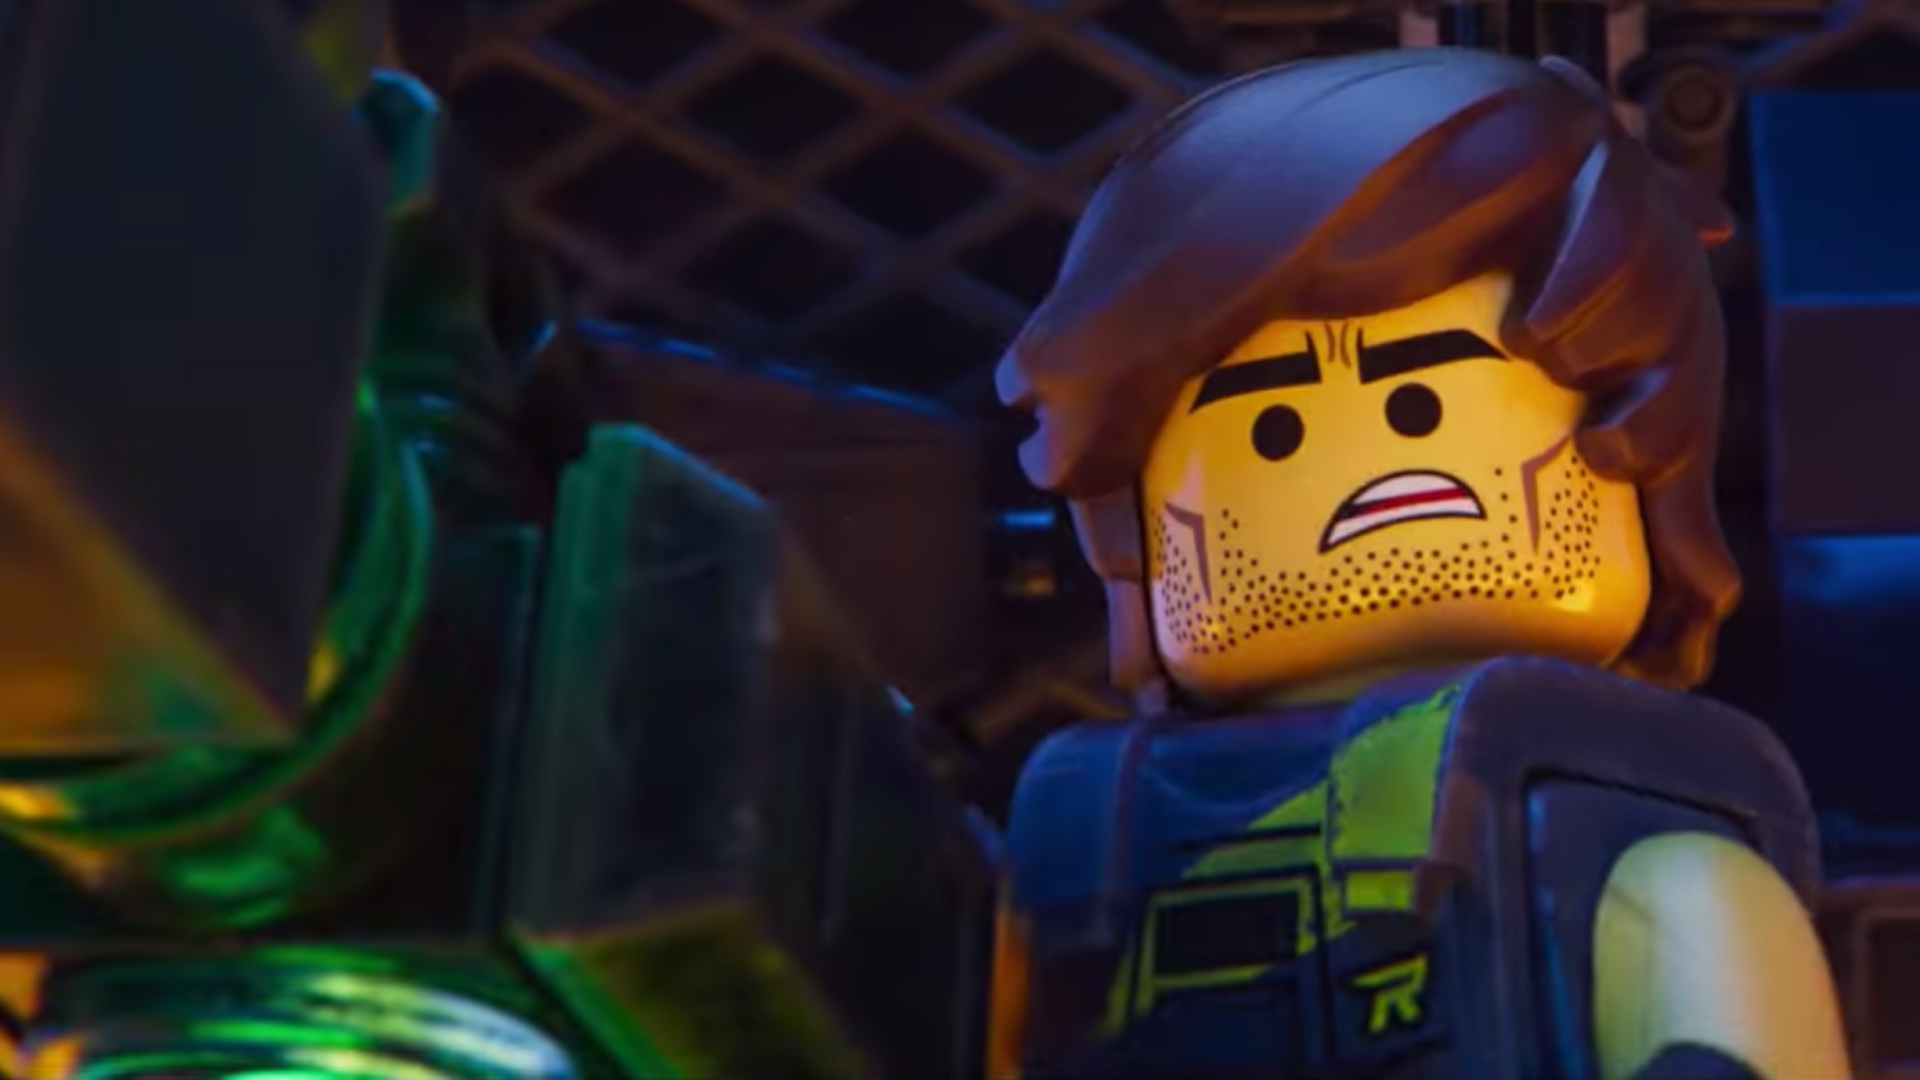 Review: Everything is just okay THE LEGO MOVIE SECOND PART